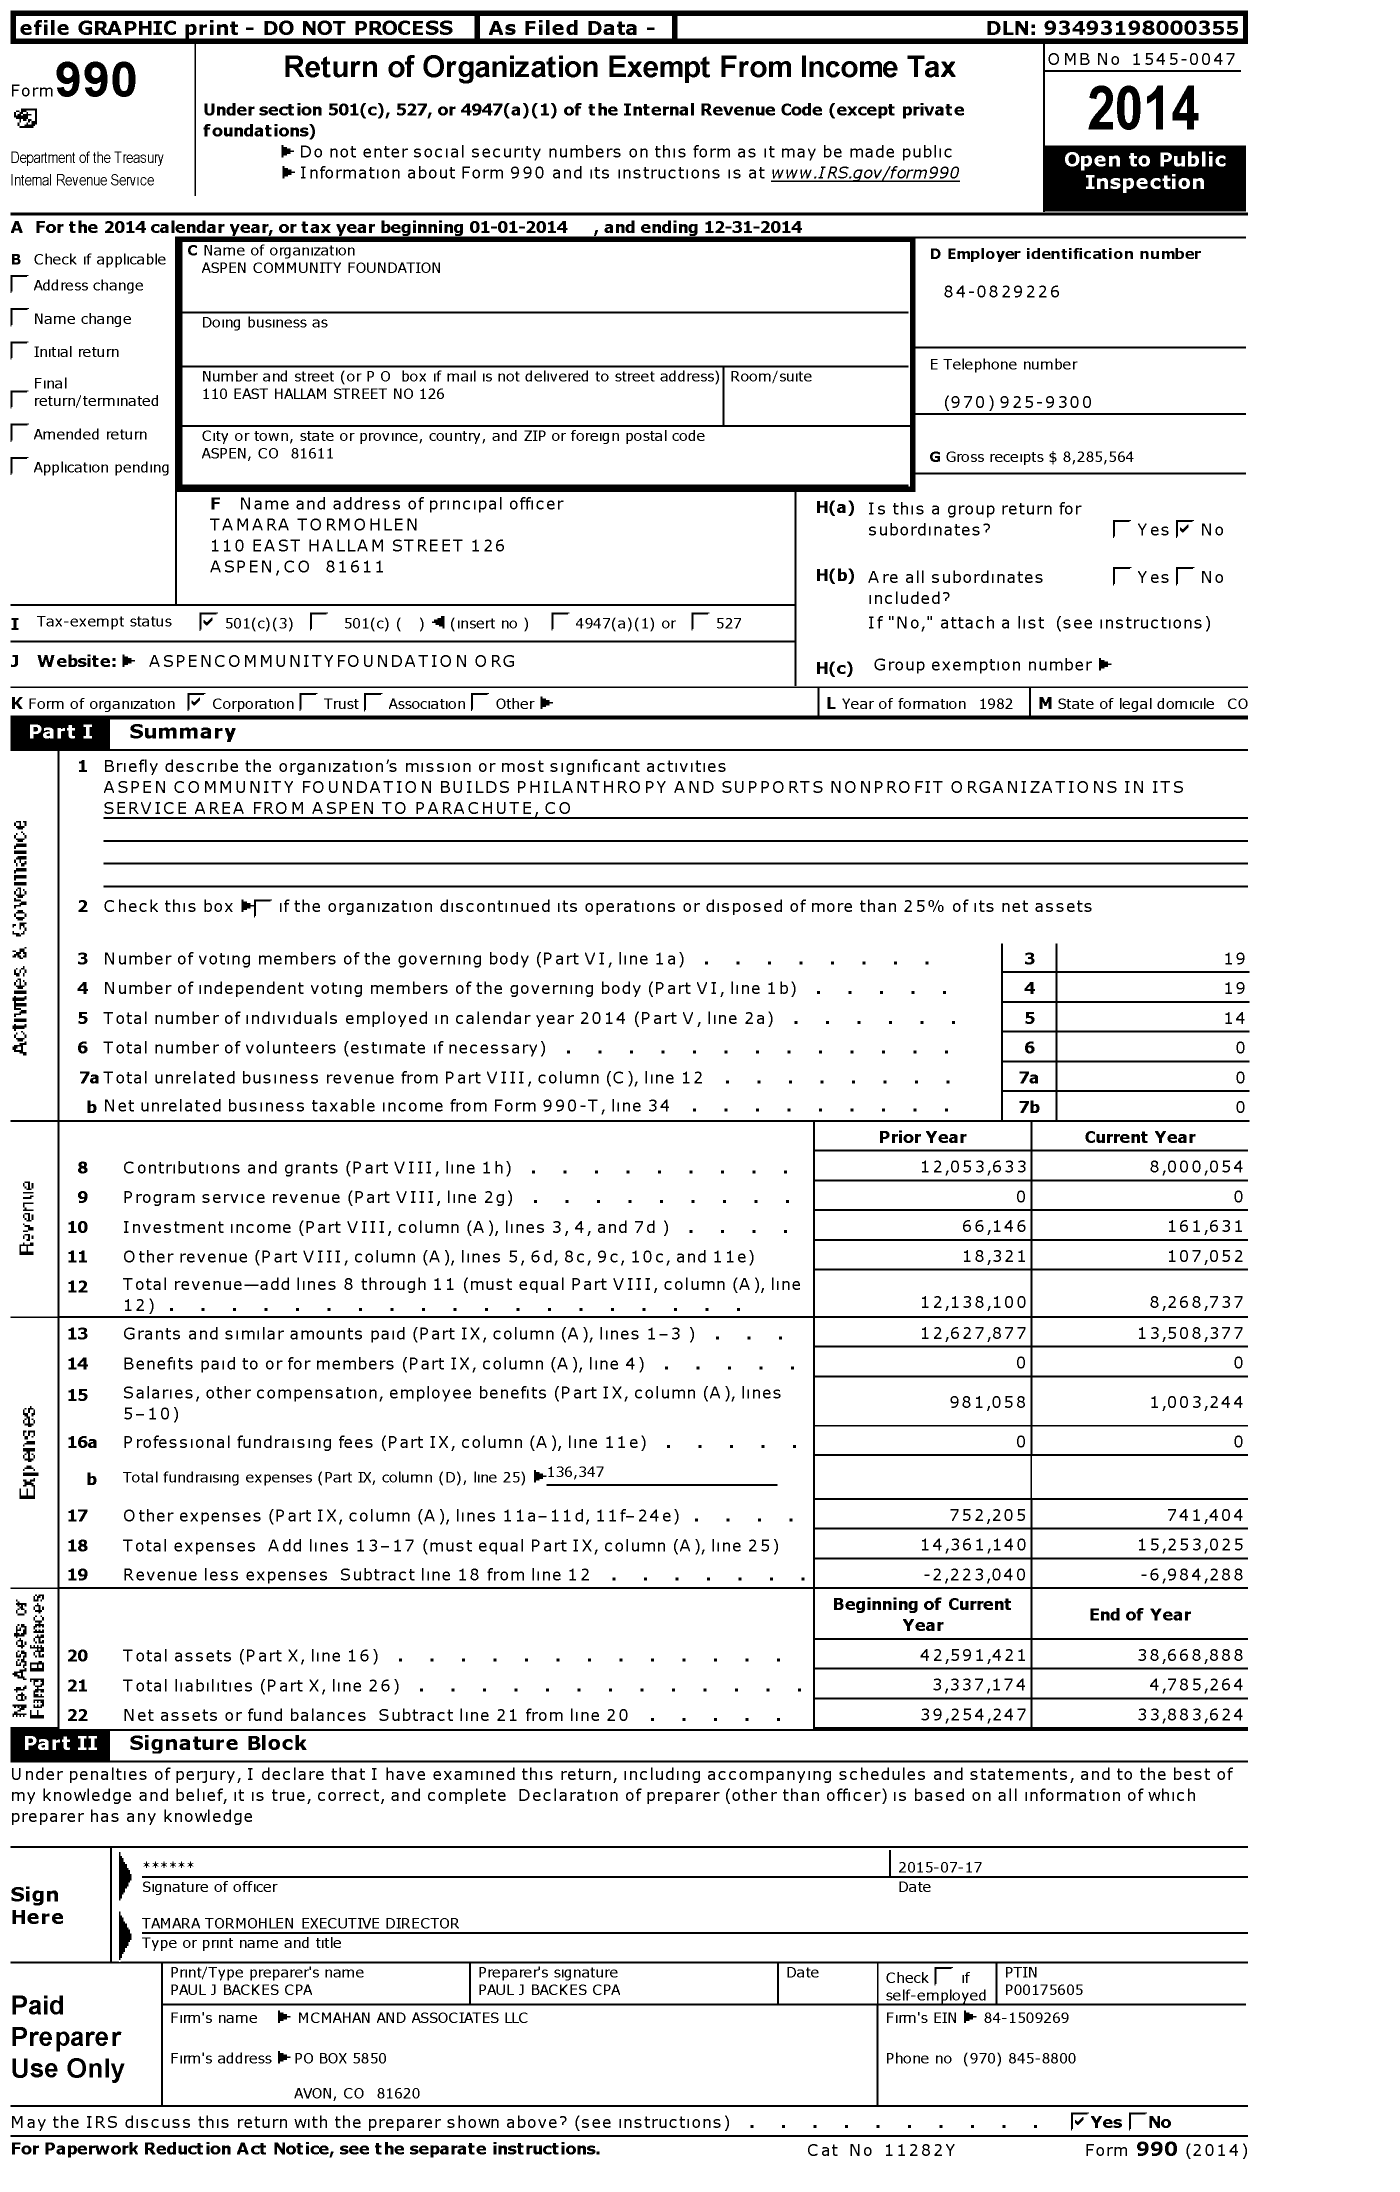 Image of first page of 2014 Form 990 for Aspen Community Foundation (ACF)